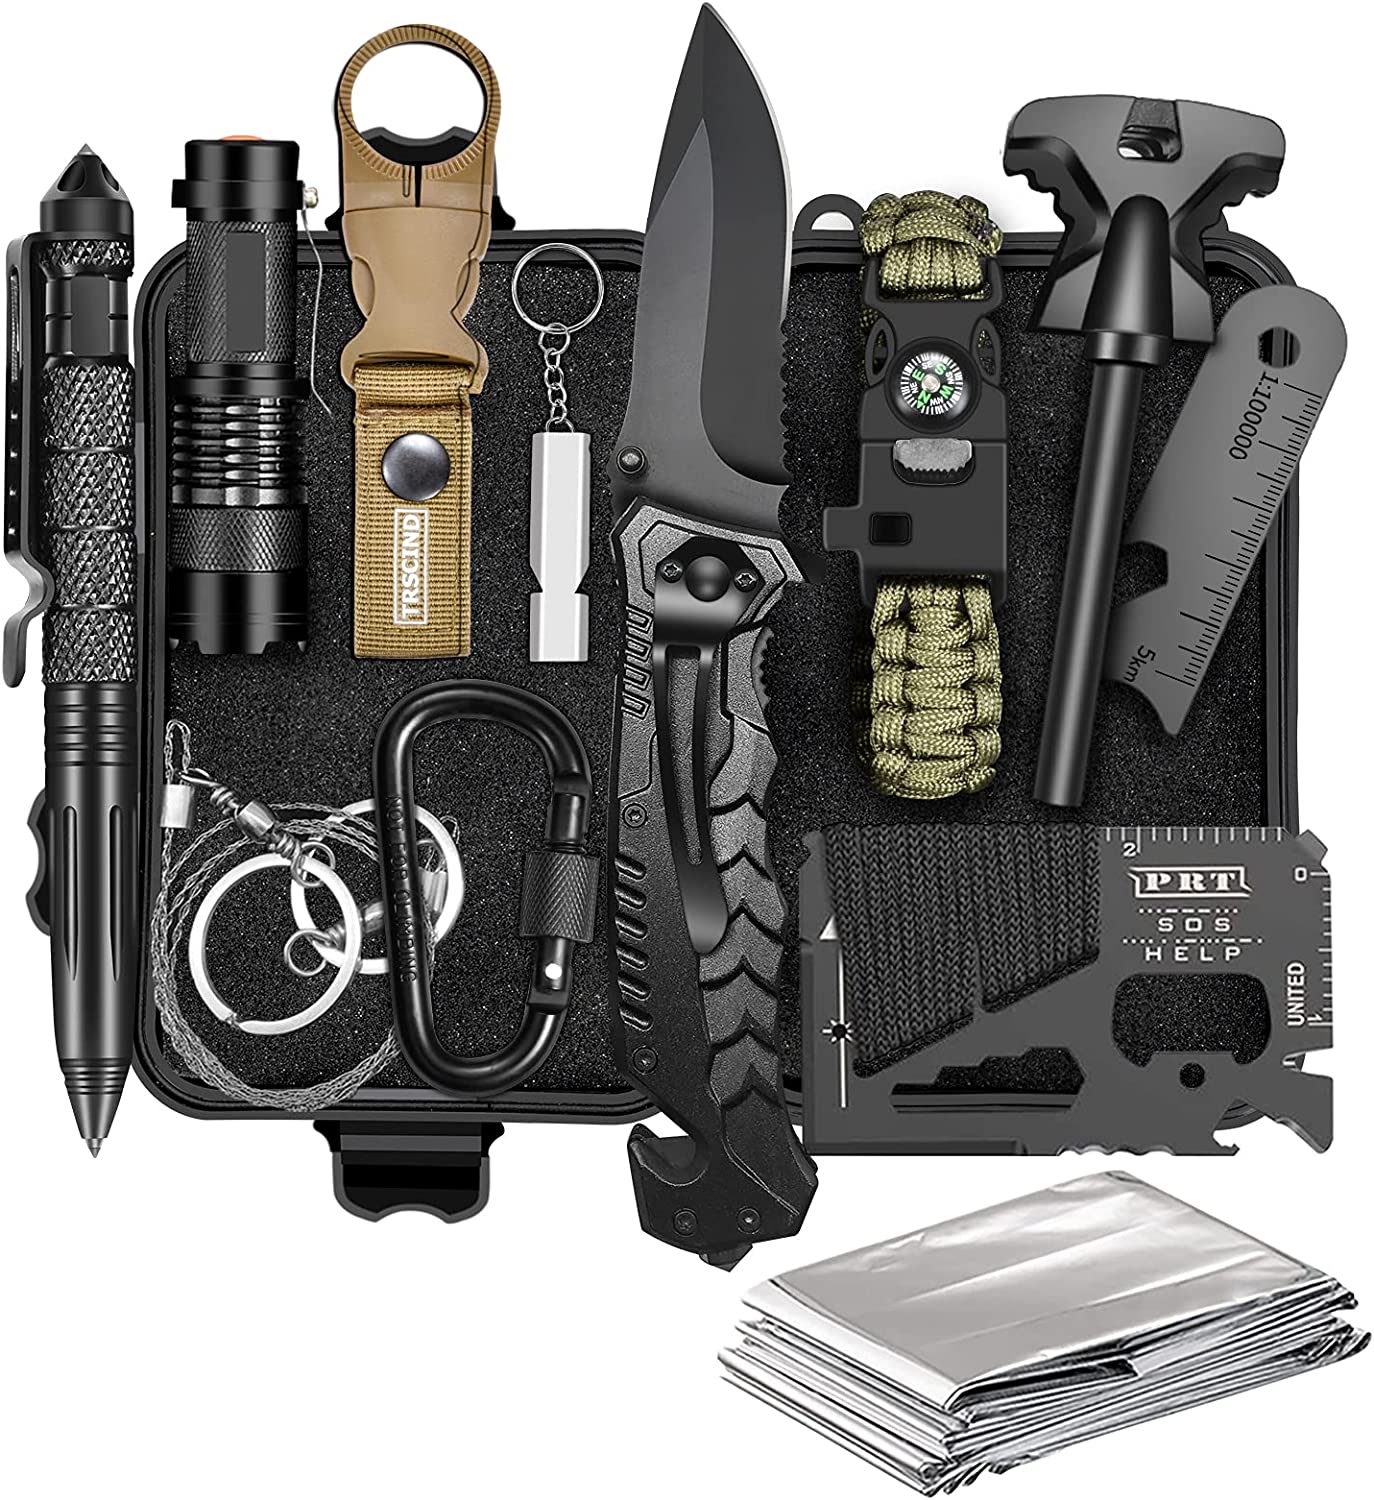 Gifts for Men Dad Him Husband, Survival Kit Tools, Survival Gear and Equipment 11 in 1, Stocking Stuffers Birthday Gifts for Boyfriend Teenage Boy Christmas, Cool Gadgets for Hunting Camping Fishing